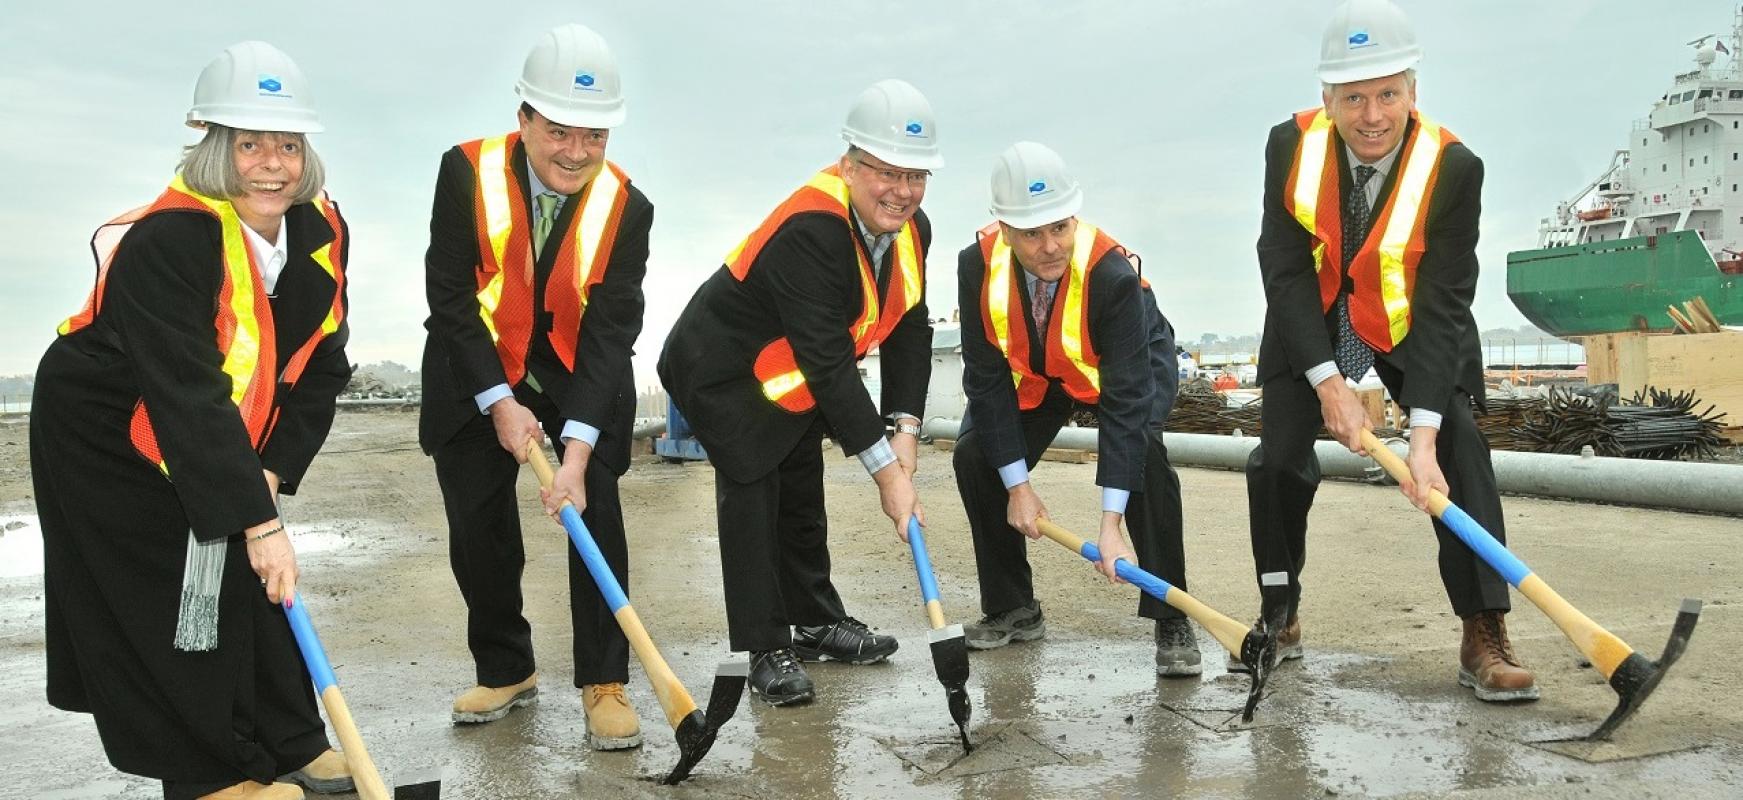 dignitaries posing at a construction groundbreaking event